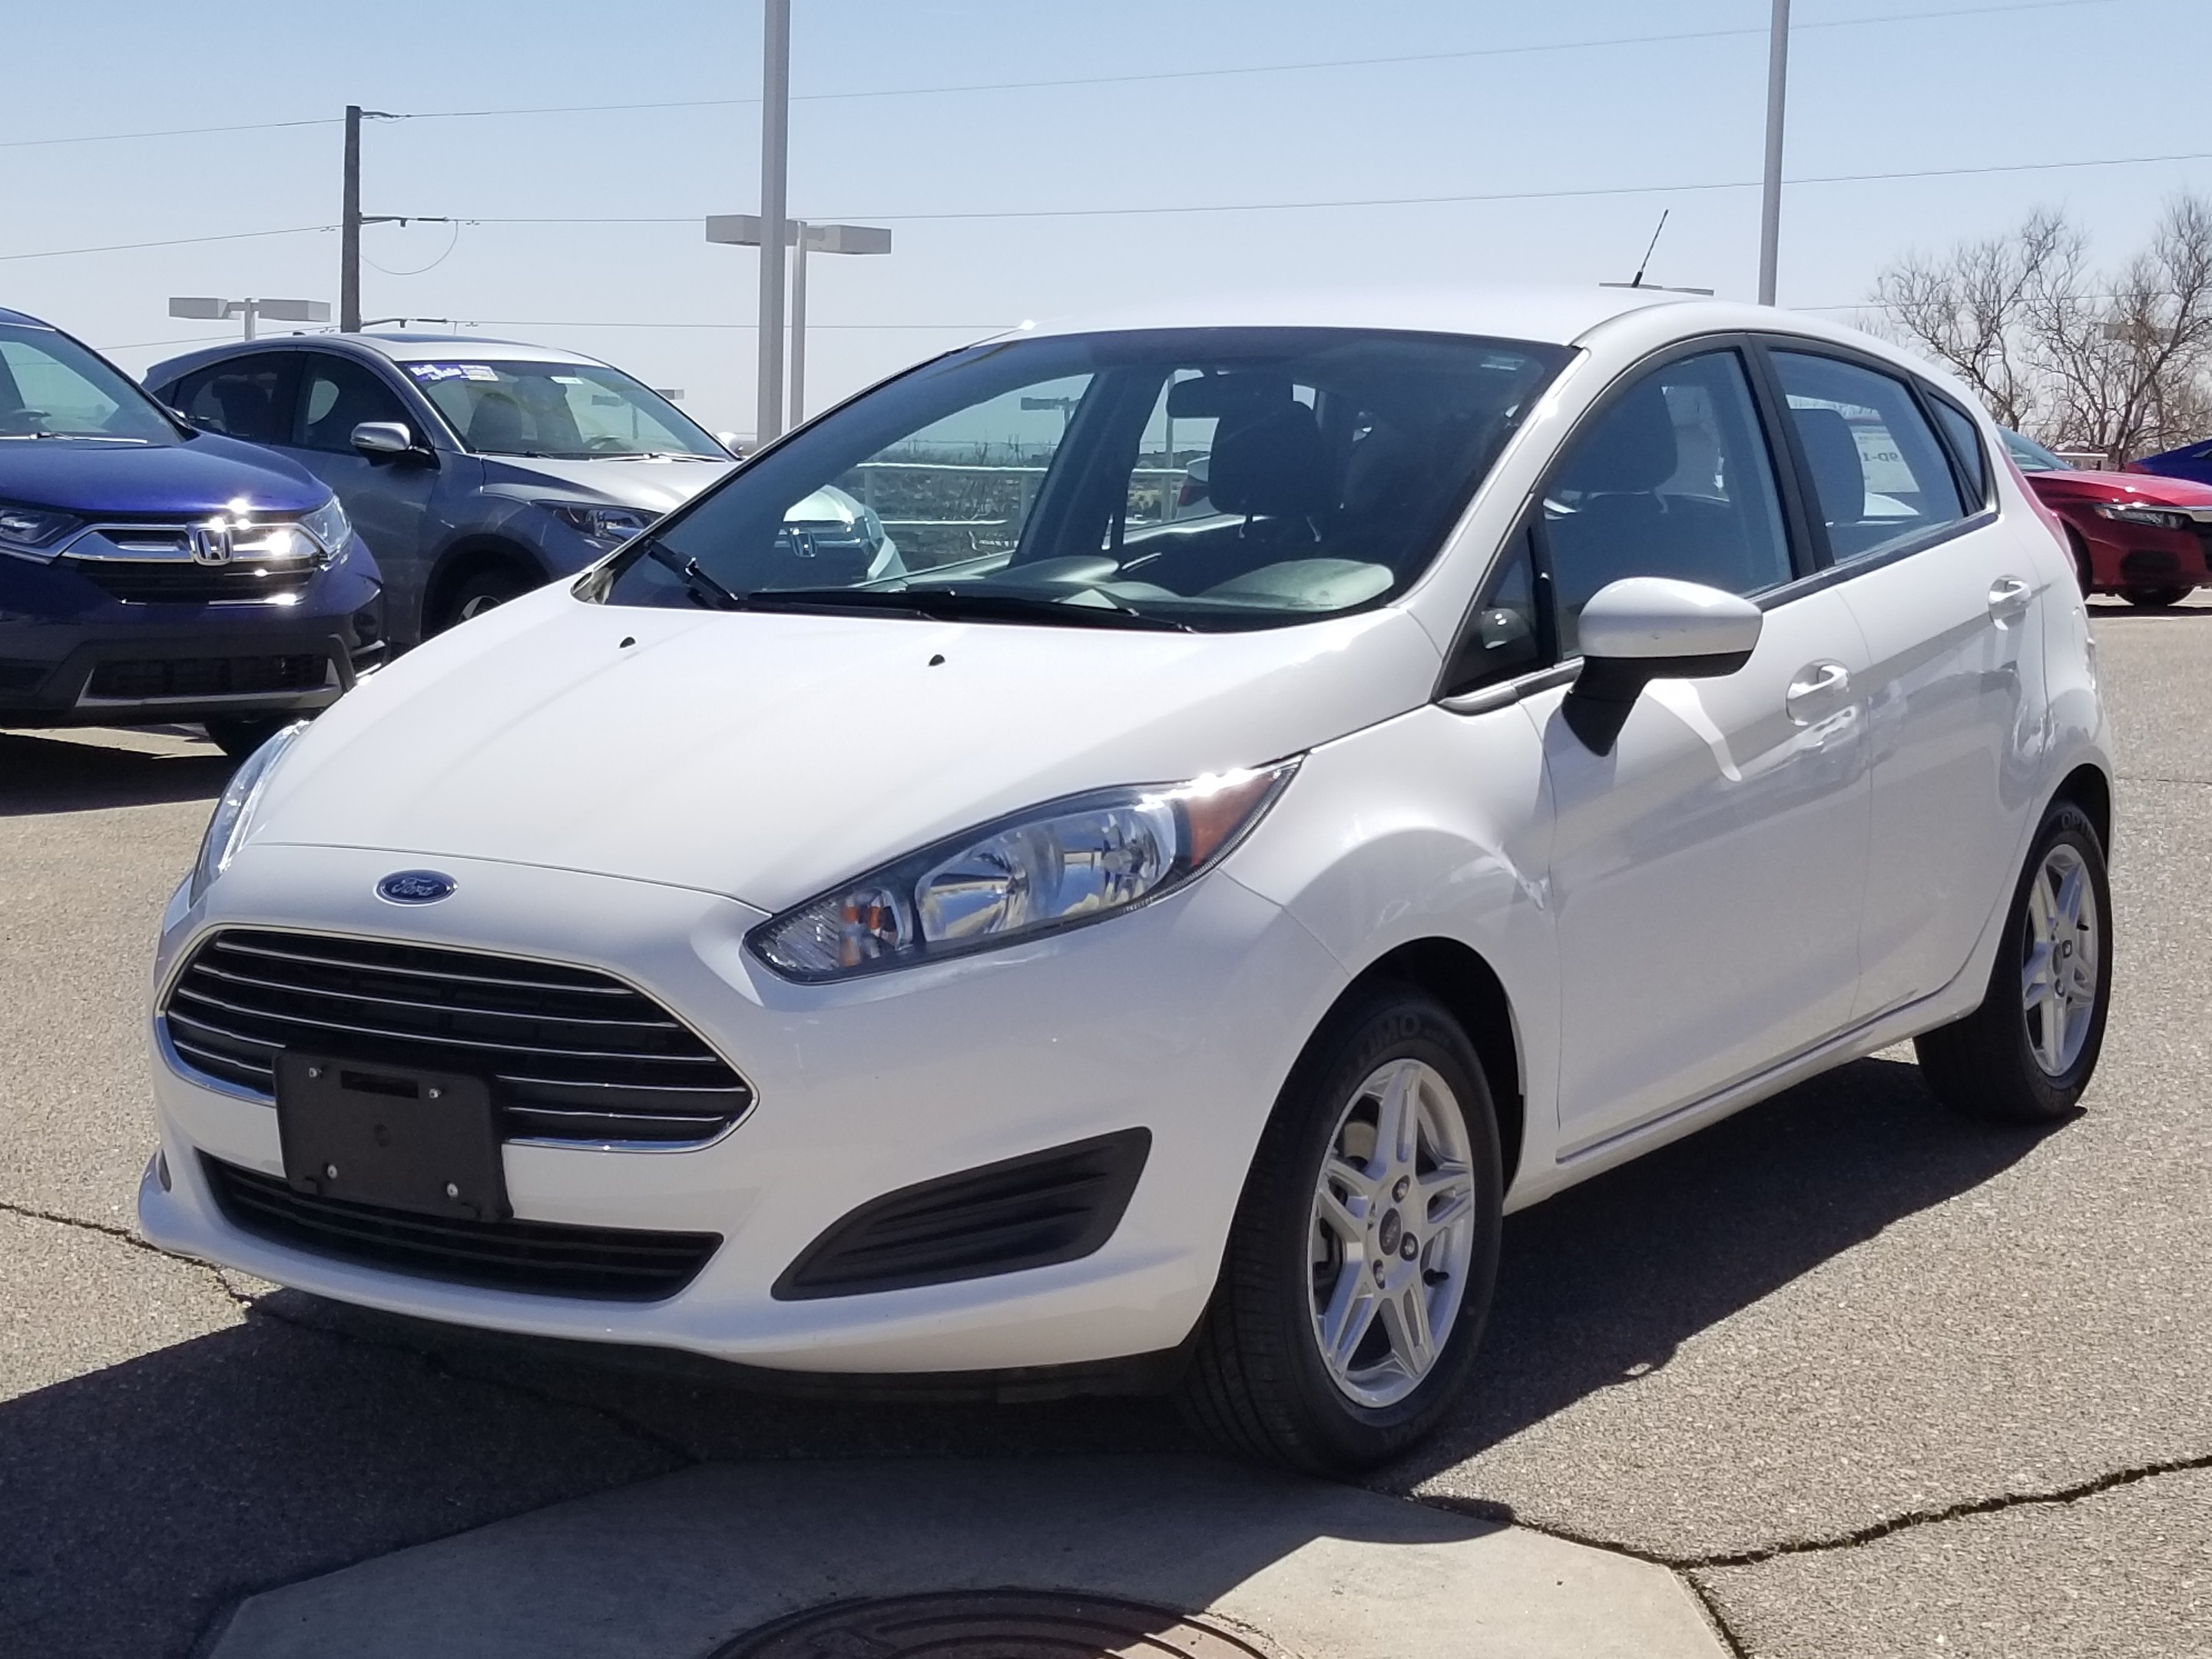 Pre-Owned 2017 Ford Fiesta SE Hatchback in Rio Rancho #PB0043